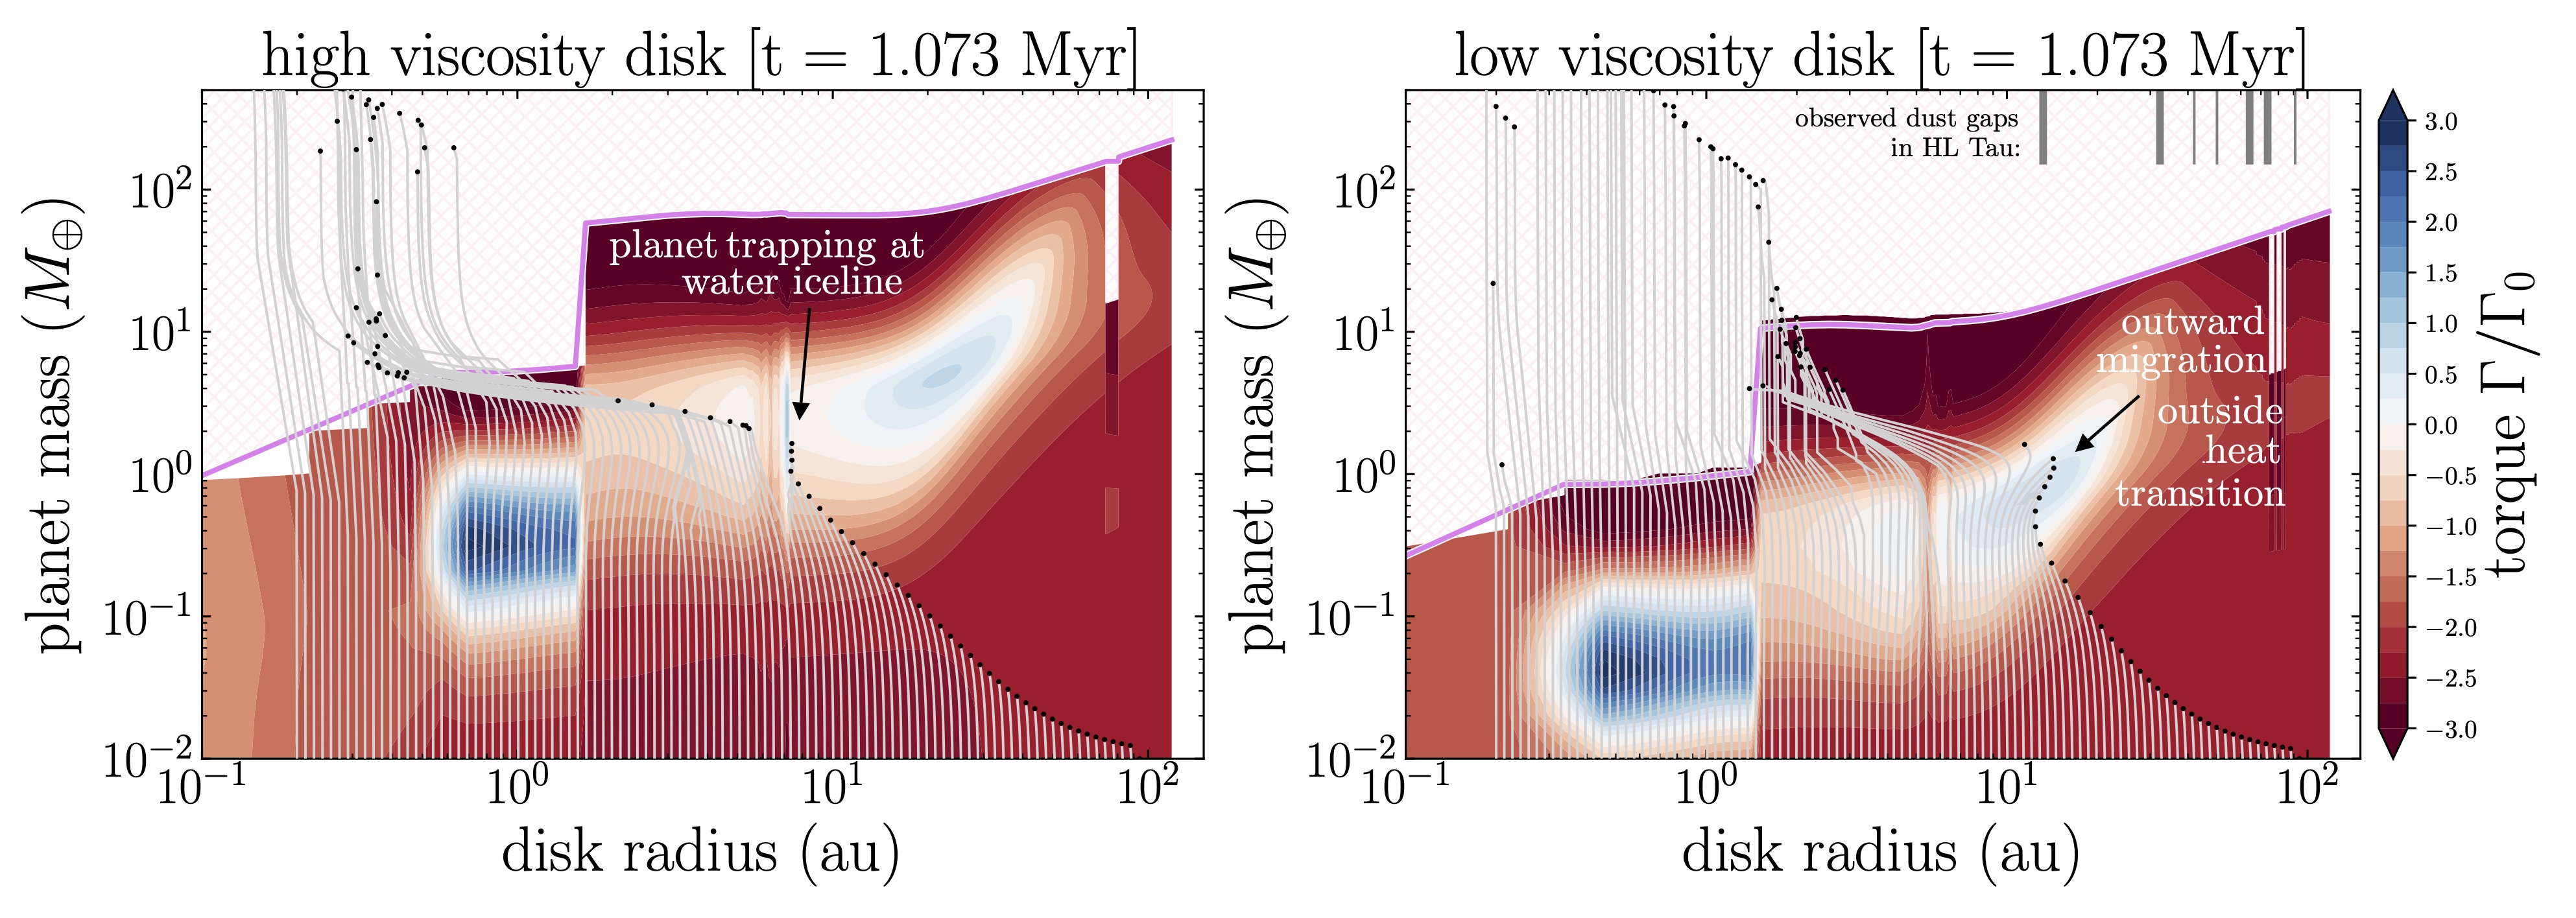 Evolution tracks of 100 planetary embryos in a high- and low-viscosity HL Tau disk model